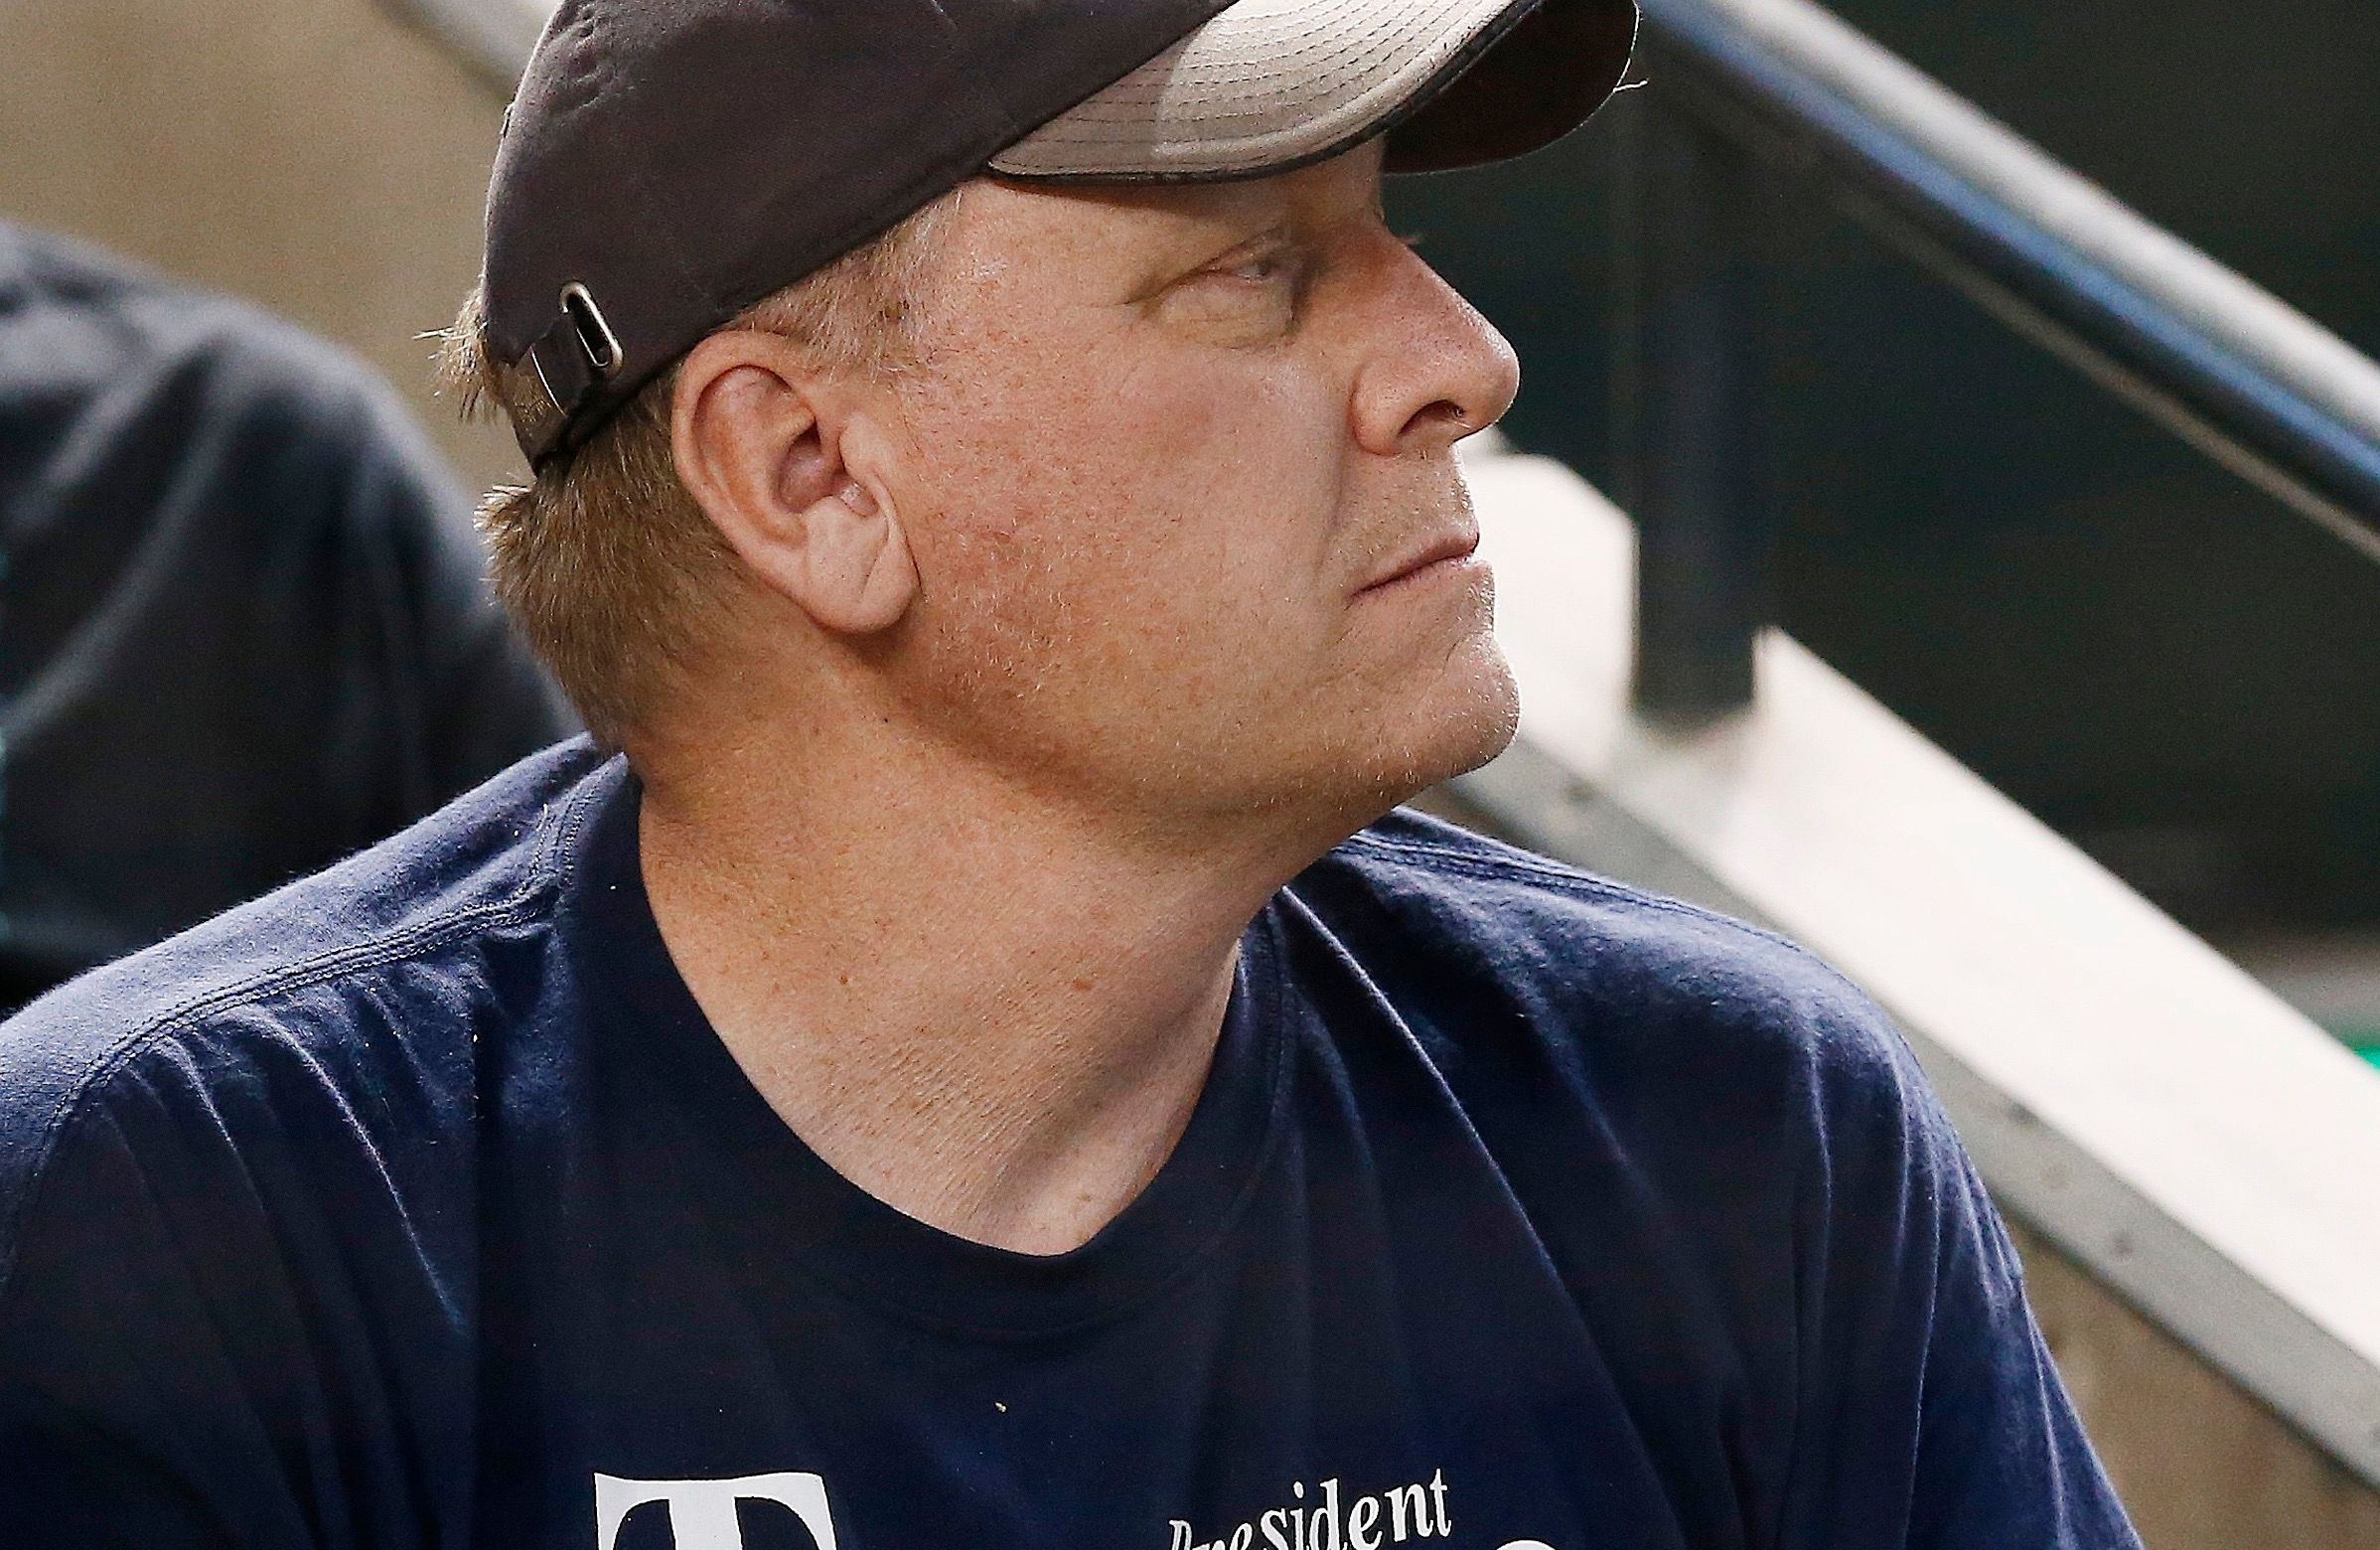 Curt Schilling says 'he wasn't voted into Hall of Fame because